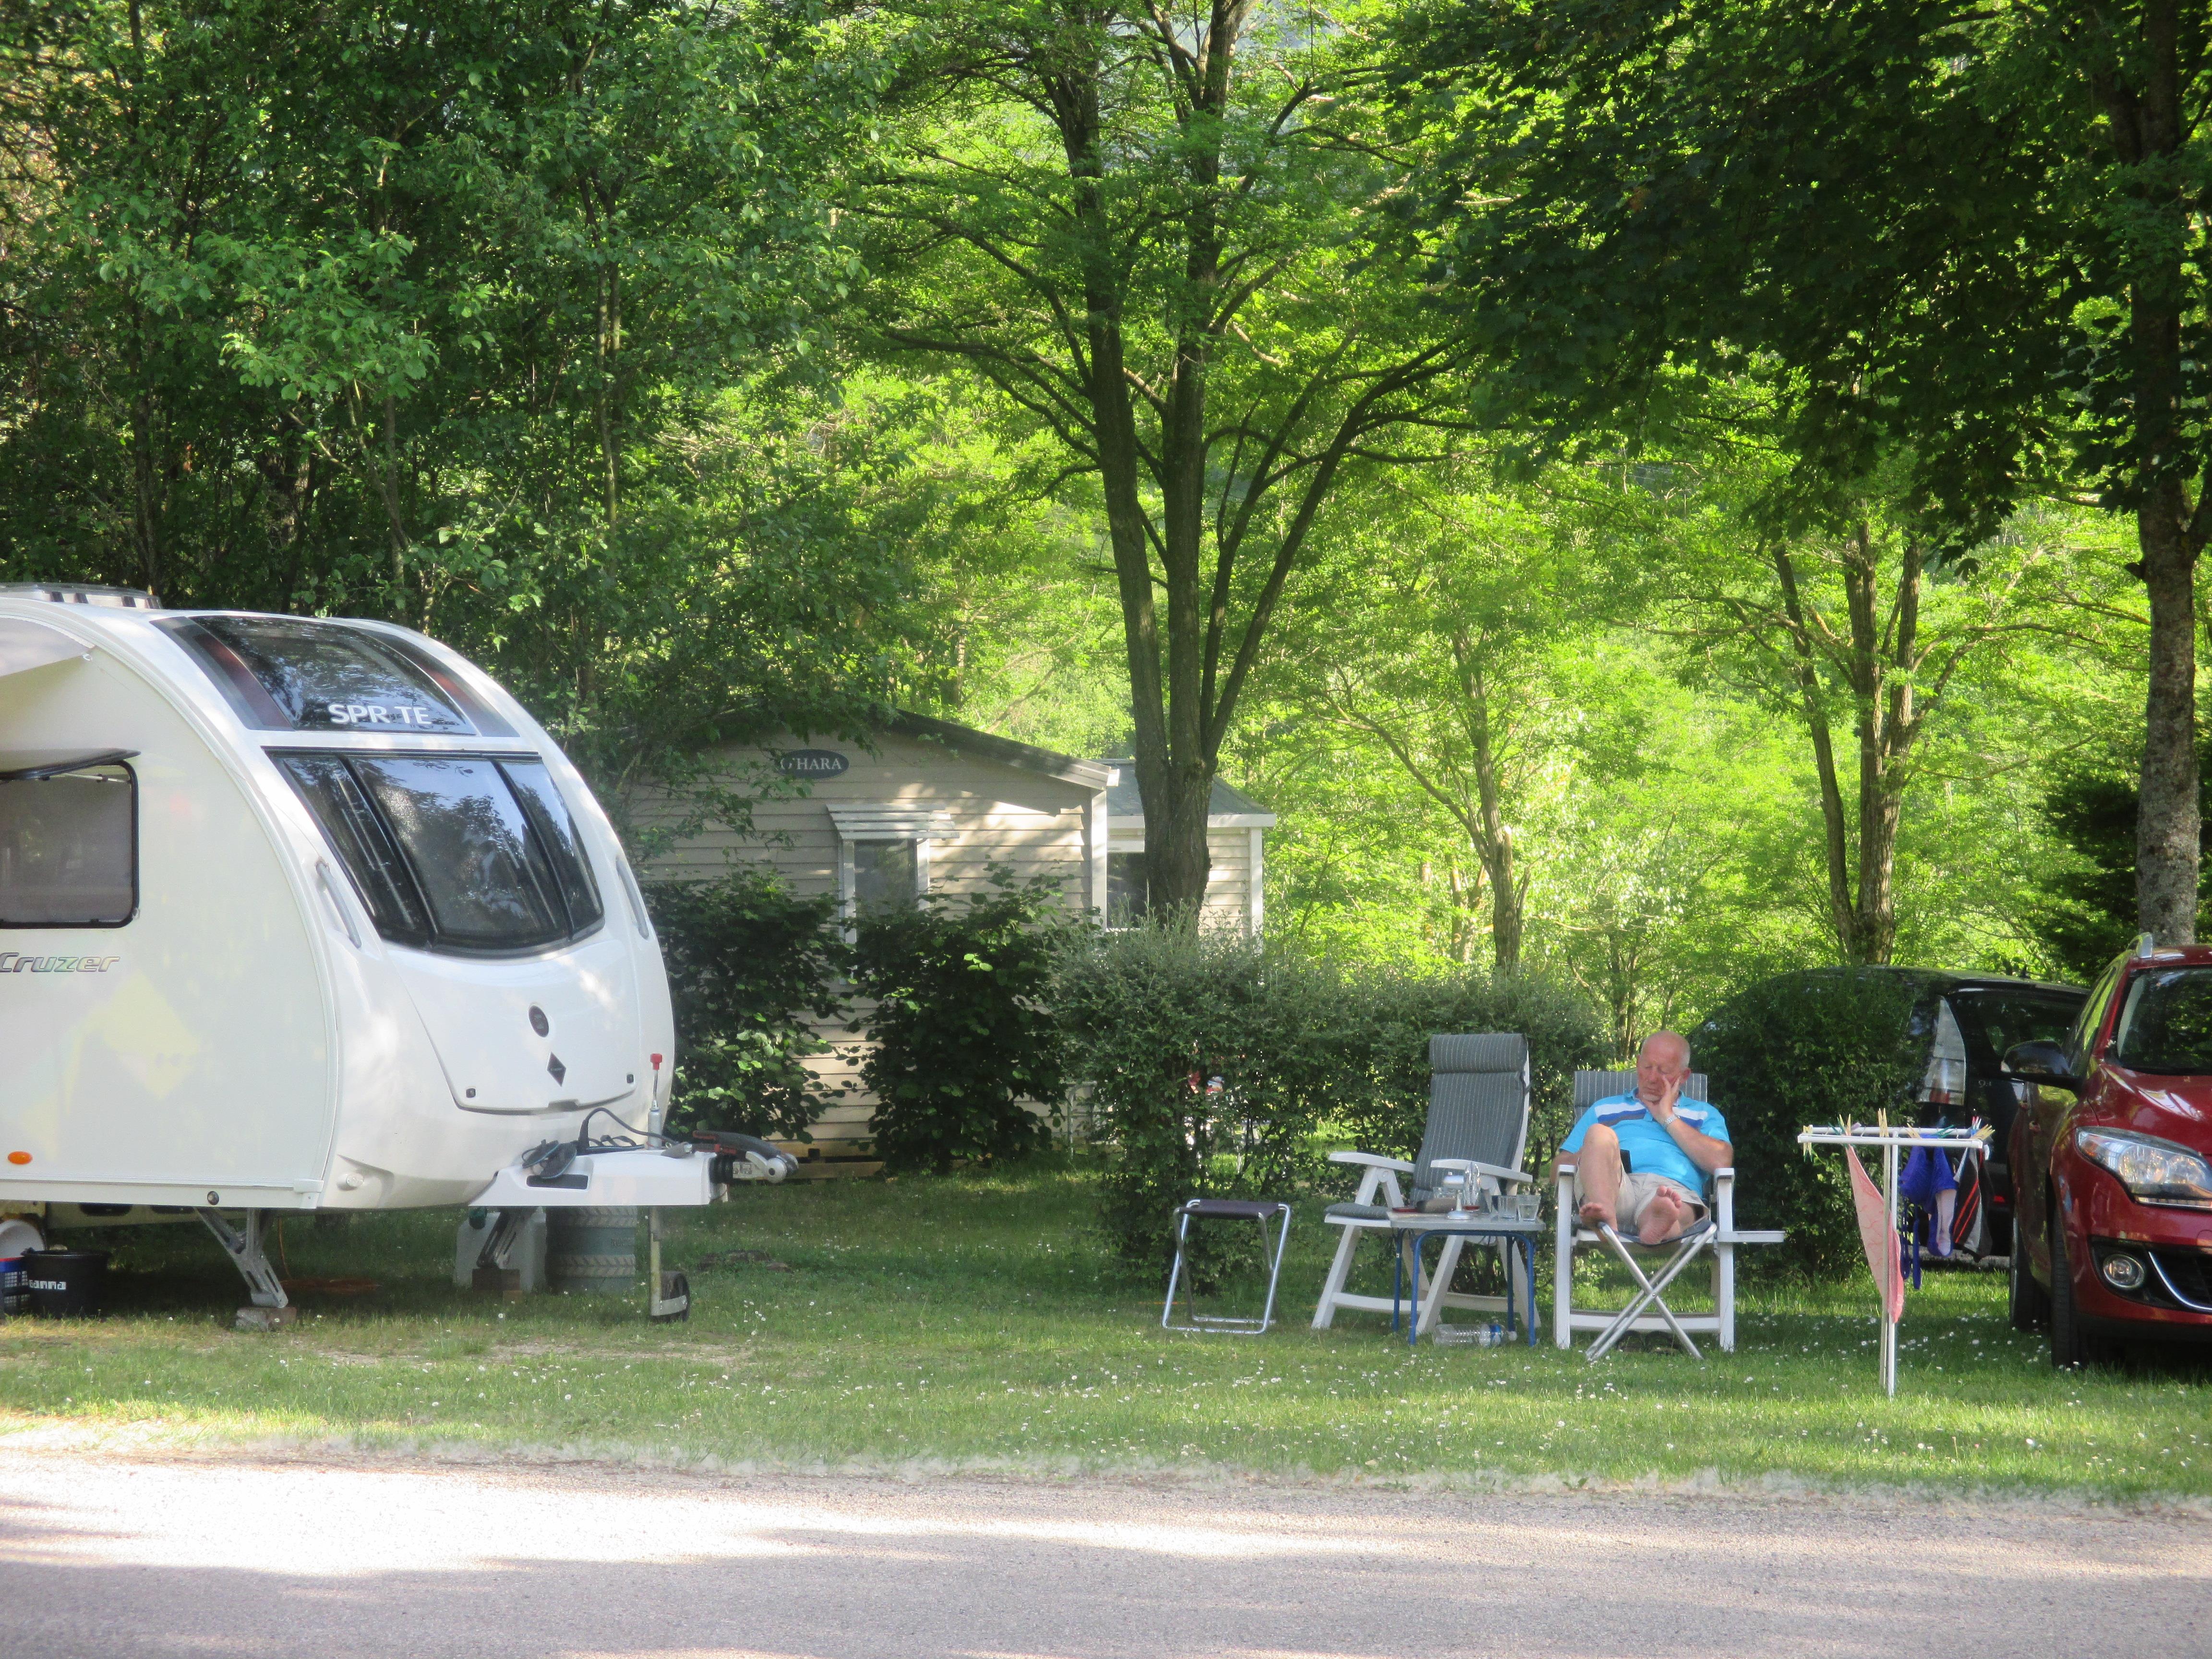 Pitch - Comfort Package (1 Tent, Caravan Or Motorhome / 1 Car / Electricity) - Camping Le Gallo Romain